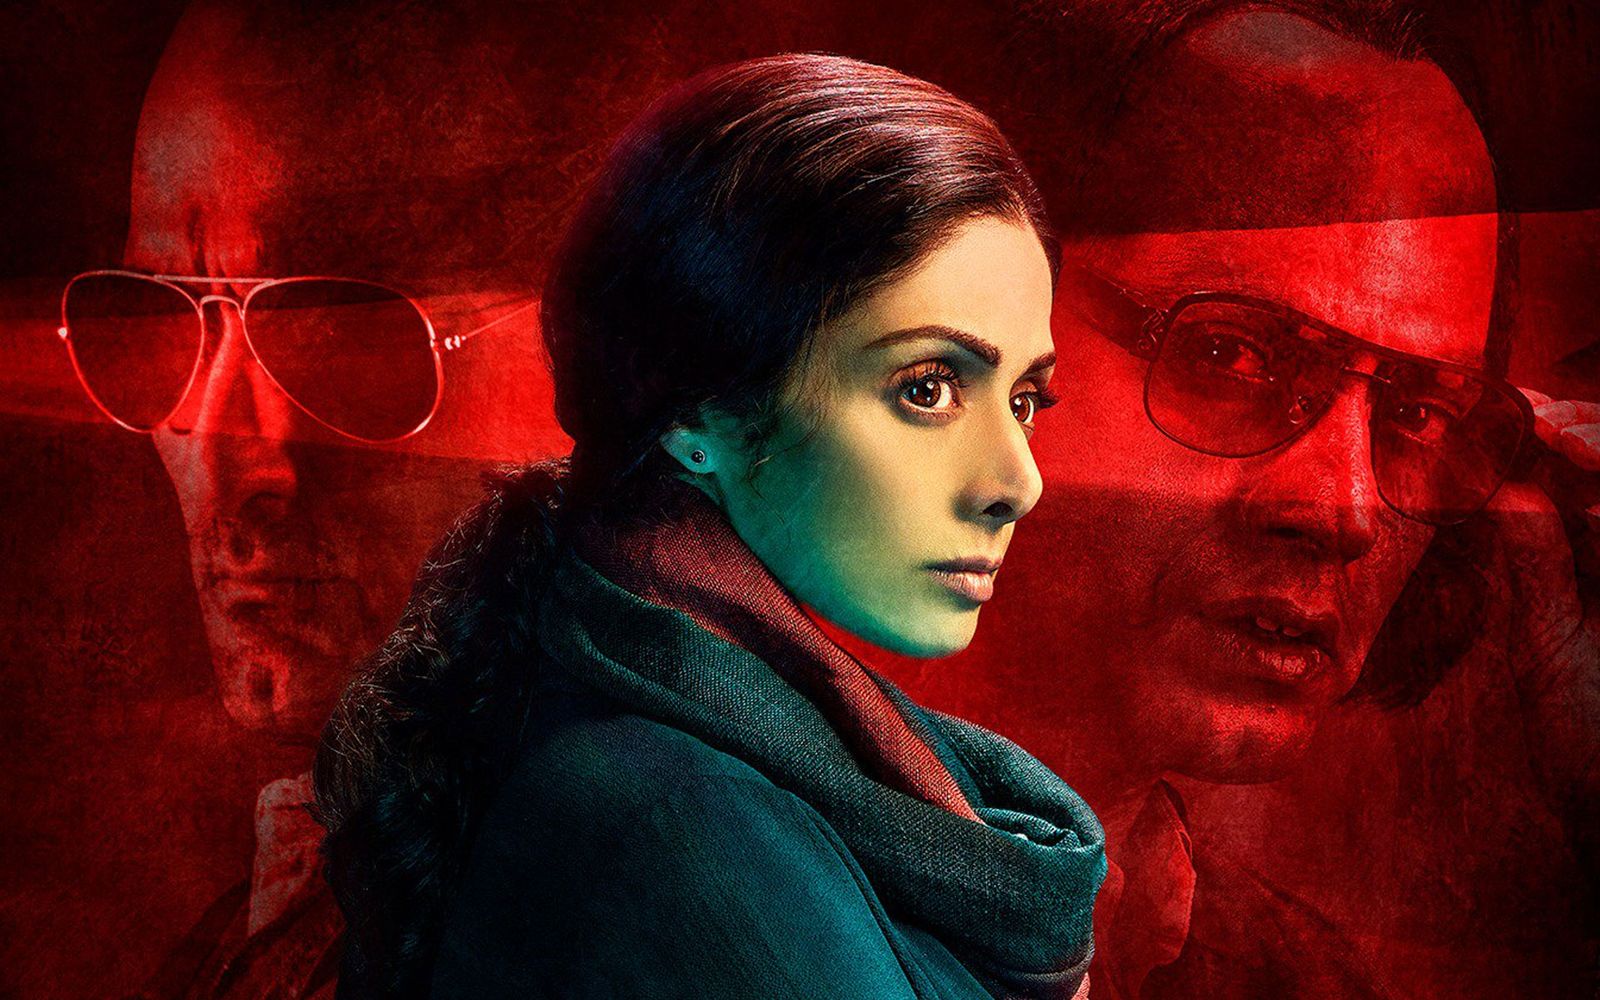 Makers Of Sridevi Starrer 'Mom' Hope Its Box Office Collections To Rise Up